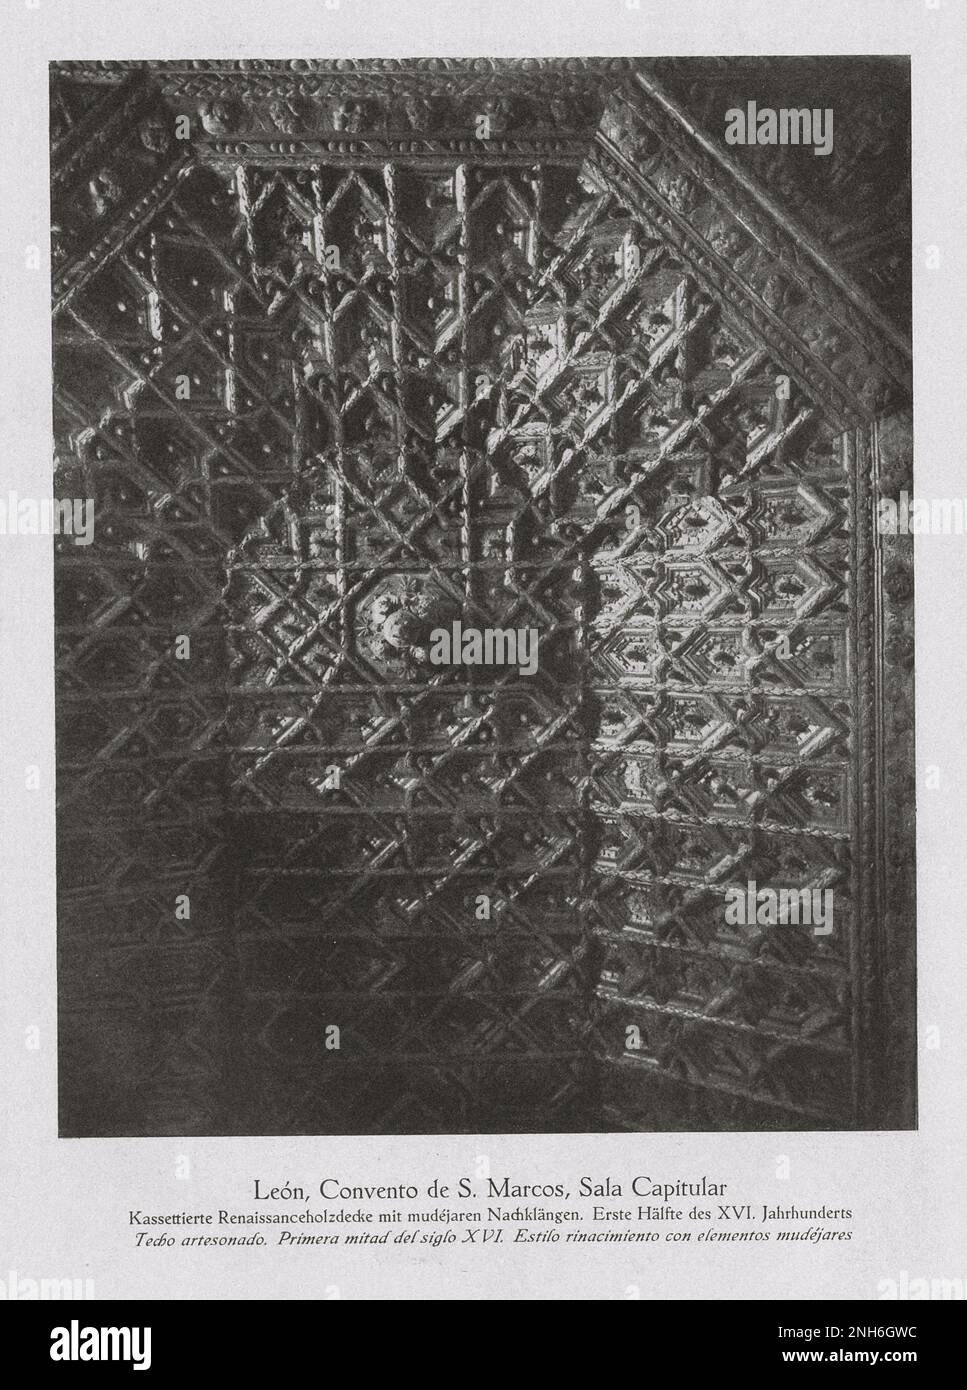 Architecture of Old Spain. Vintage photo of Convento de San Marcos, Sala Capitular in Leon Coffered ceiling. First half of the 16th century. Renaissance style with Mudejar elements Stock Photo